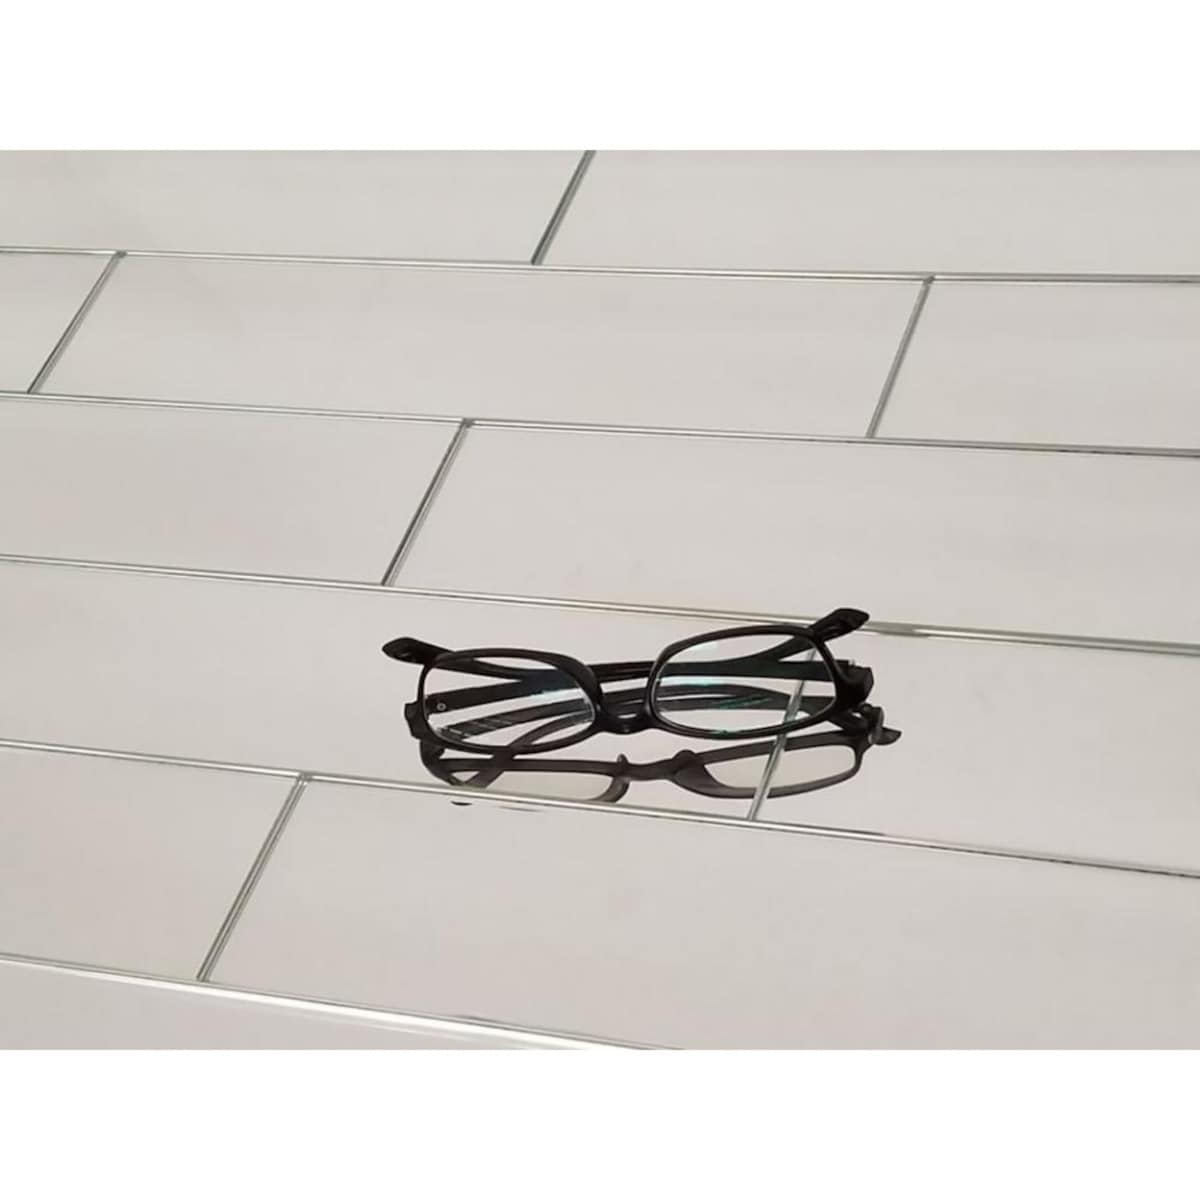 Frosted Reflections 3 in. x 6 in. Matte Glass Mirror Beveled Subway Decorative Kitchen & Bathroom Wall Tile Abolos Color: Graphite